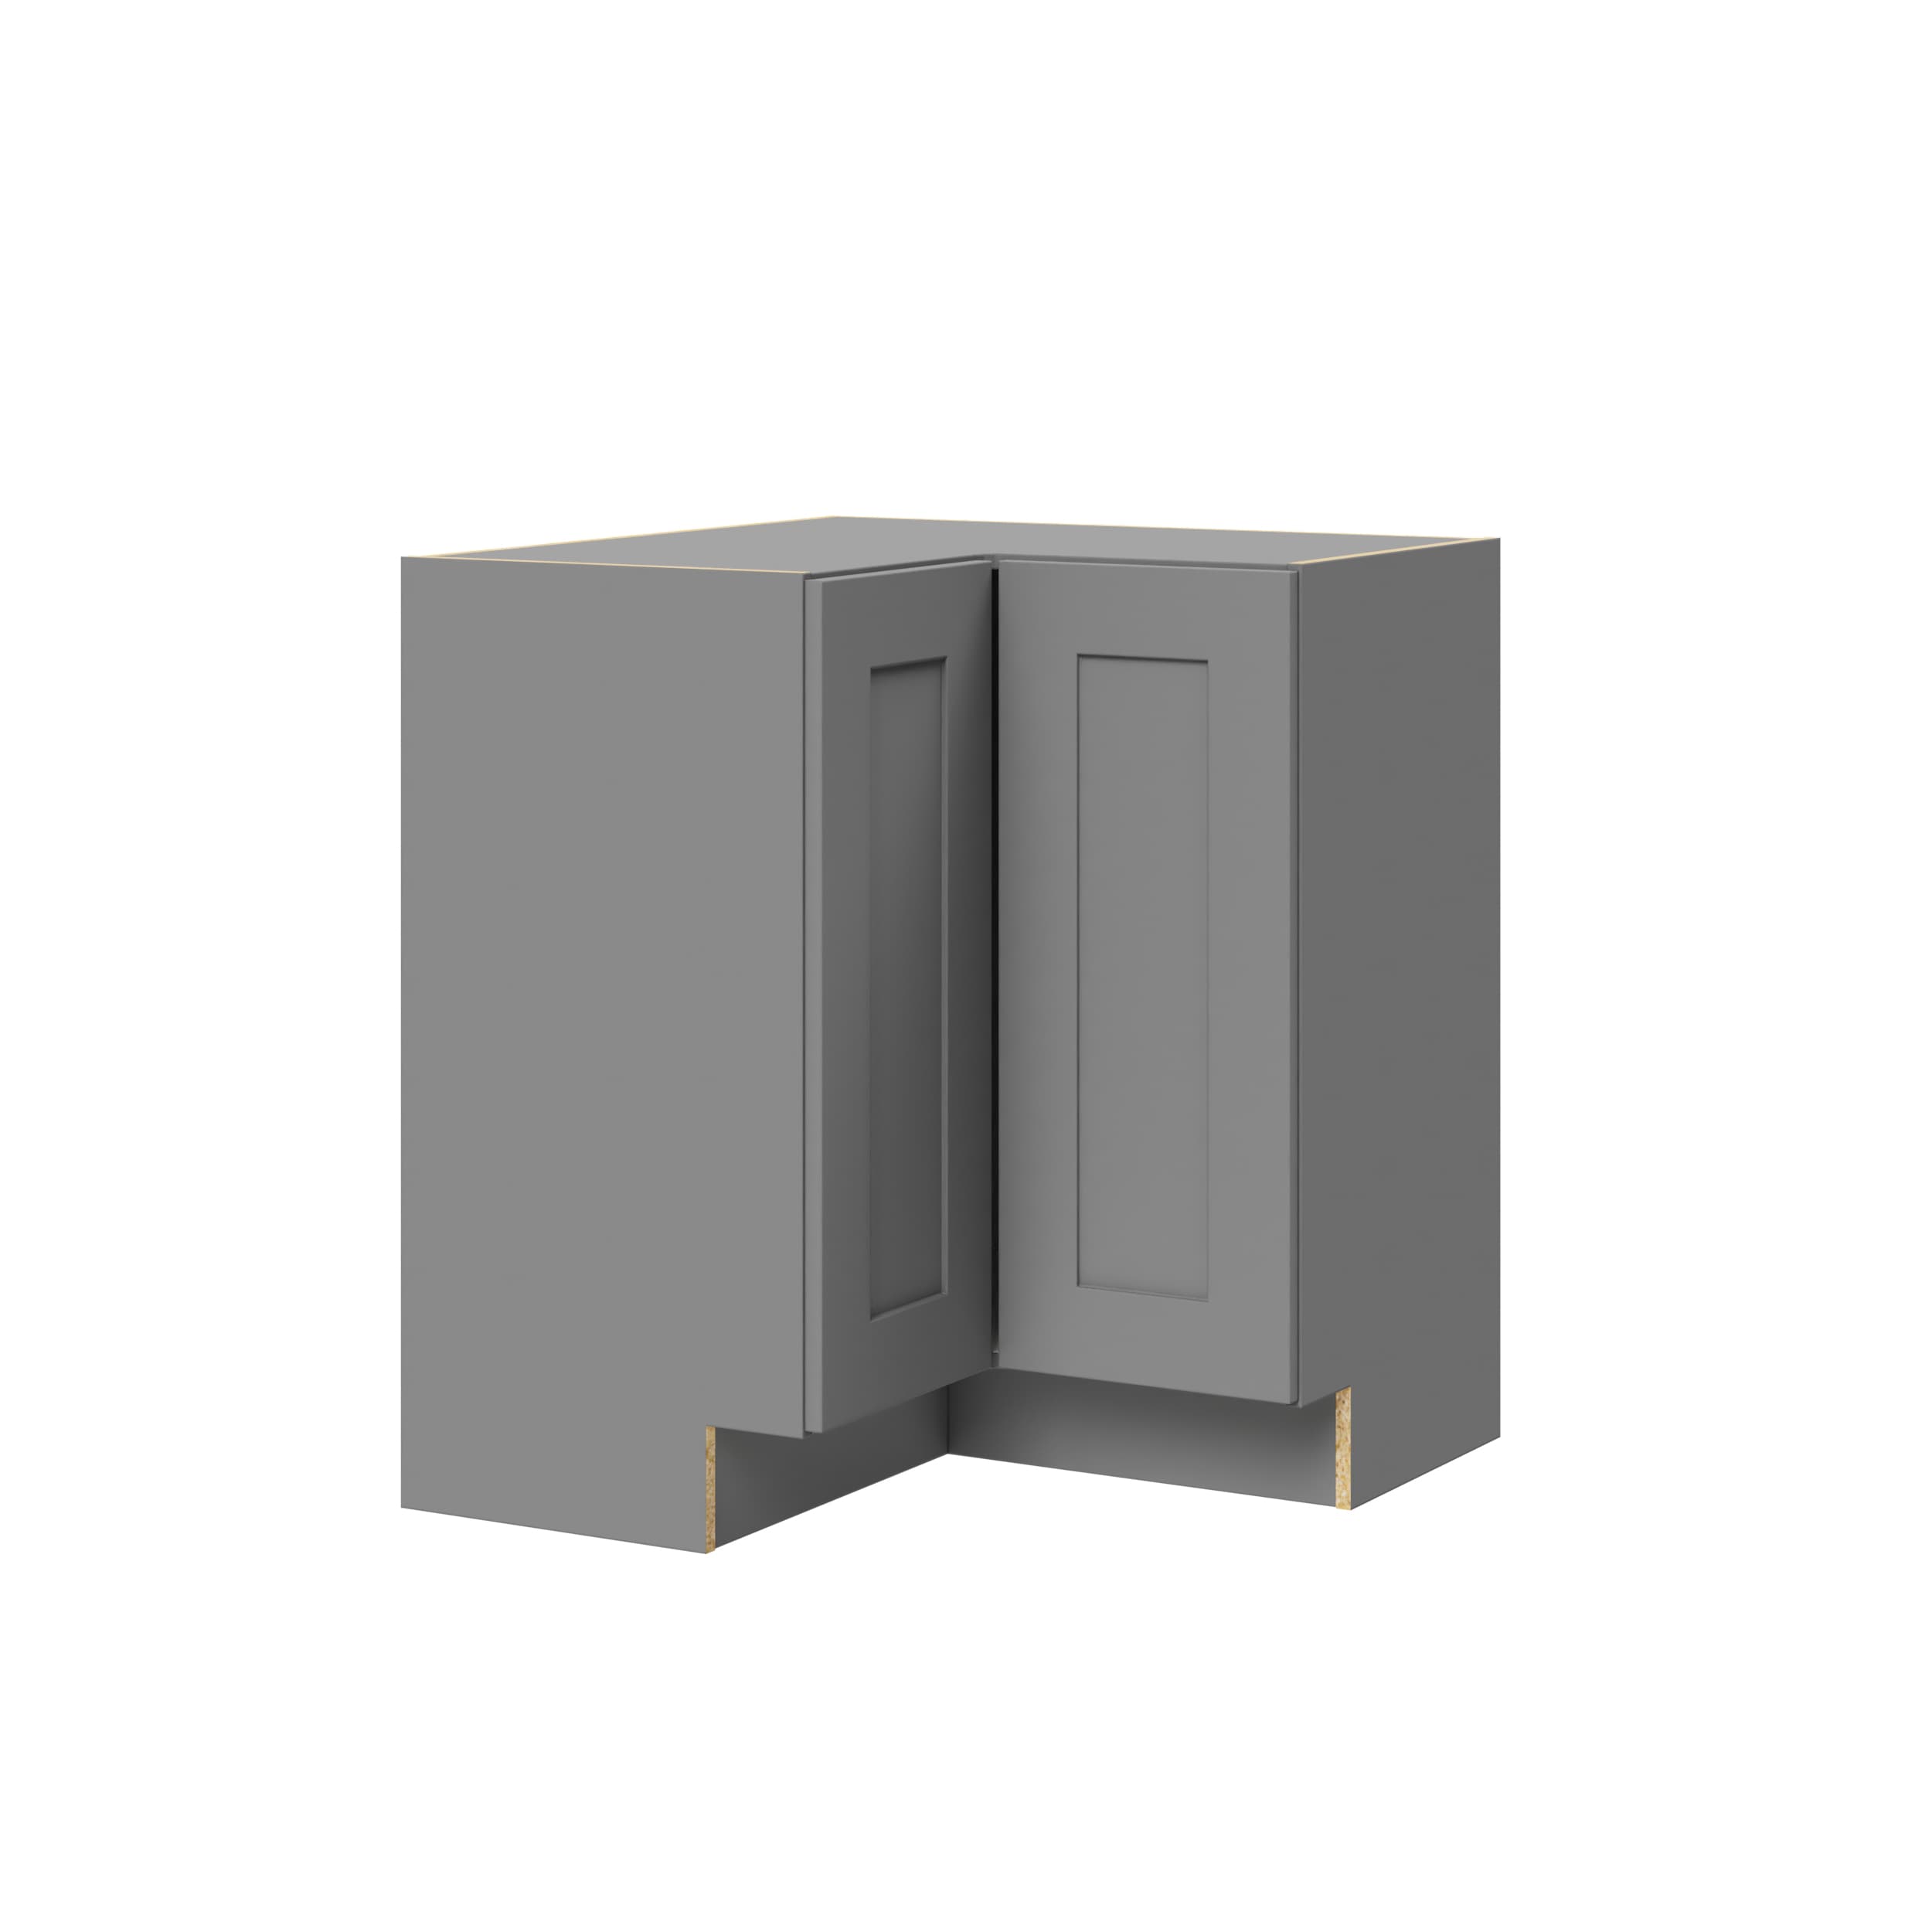 W Susan D Shaker Door 34.5-in Style) at Fully Assembled Hugo&Borg Panel H Cabinet Laval x Base Laval 30-in 30.8-in Lazy (Recessed Gray Corner x